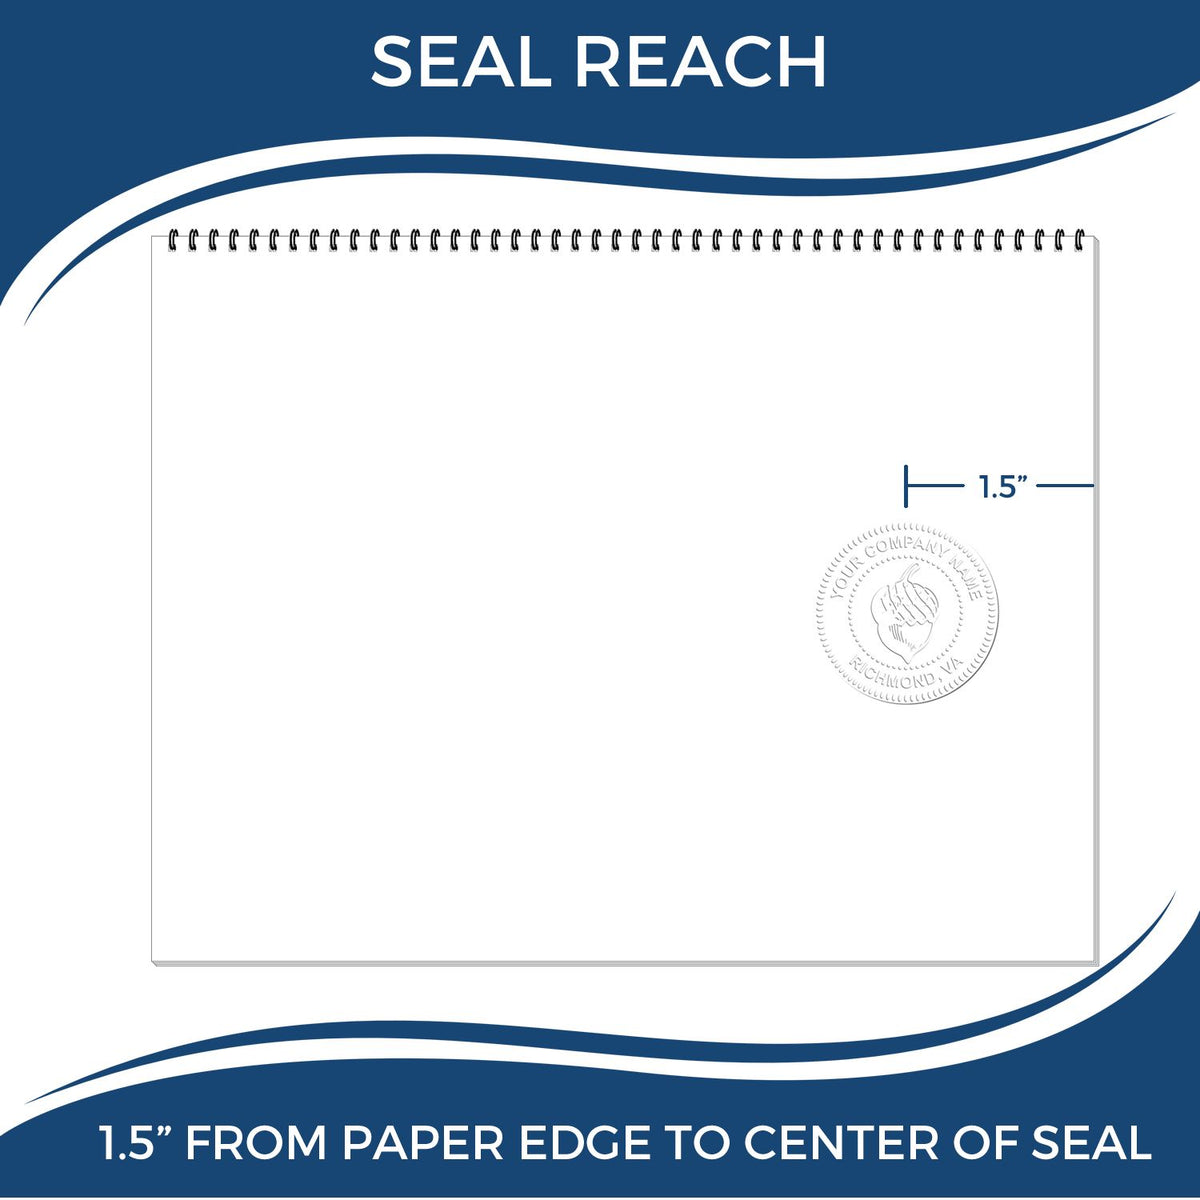 An infographic showing the seal reach which is represented by a ruler and a miniature seal image of the State of Alabama Architectural Seal Embosser